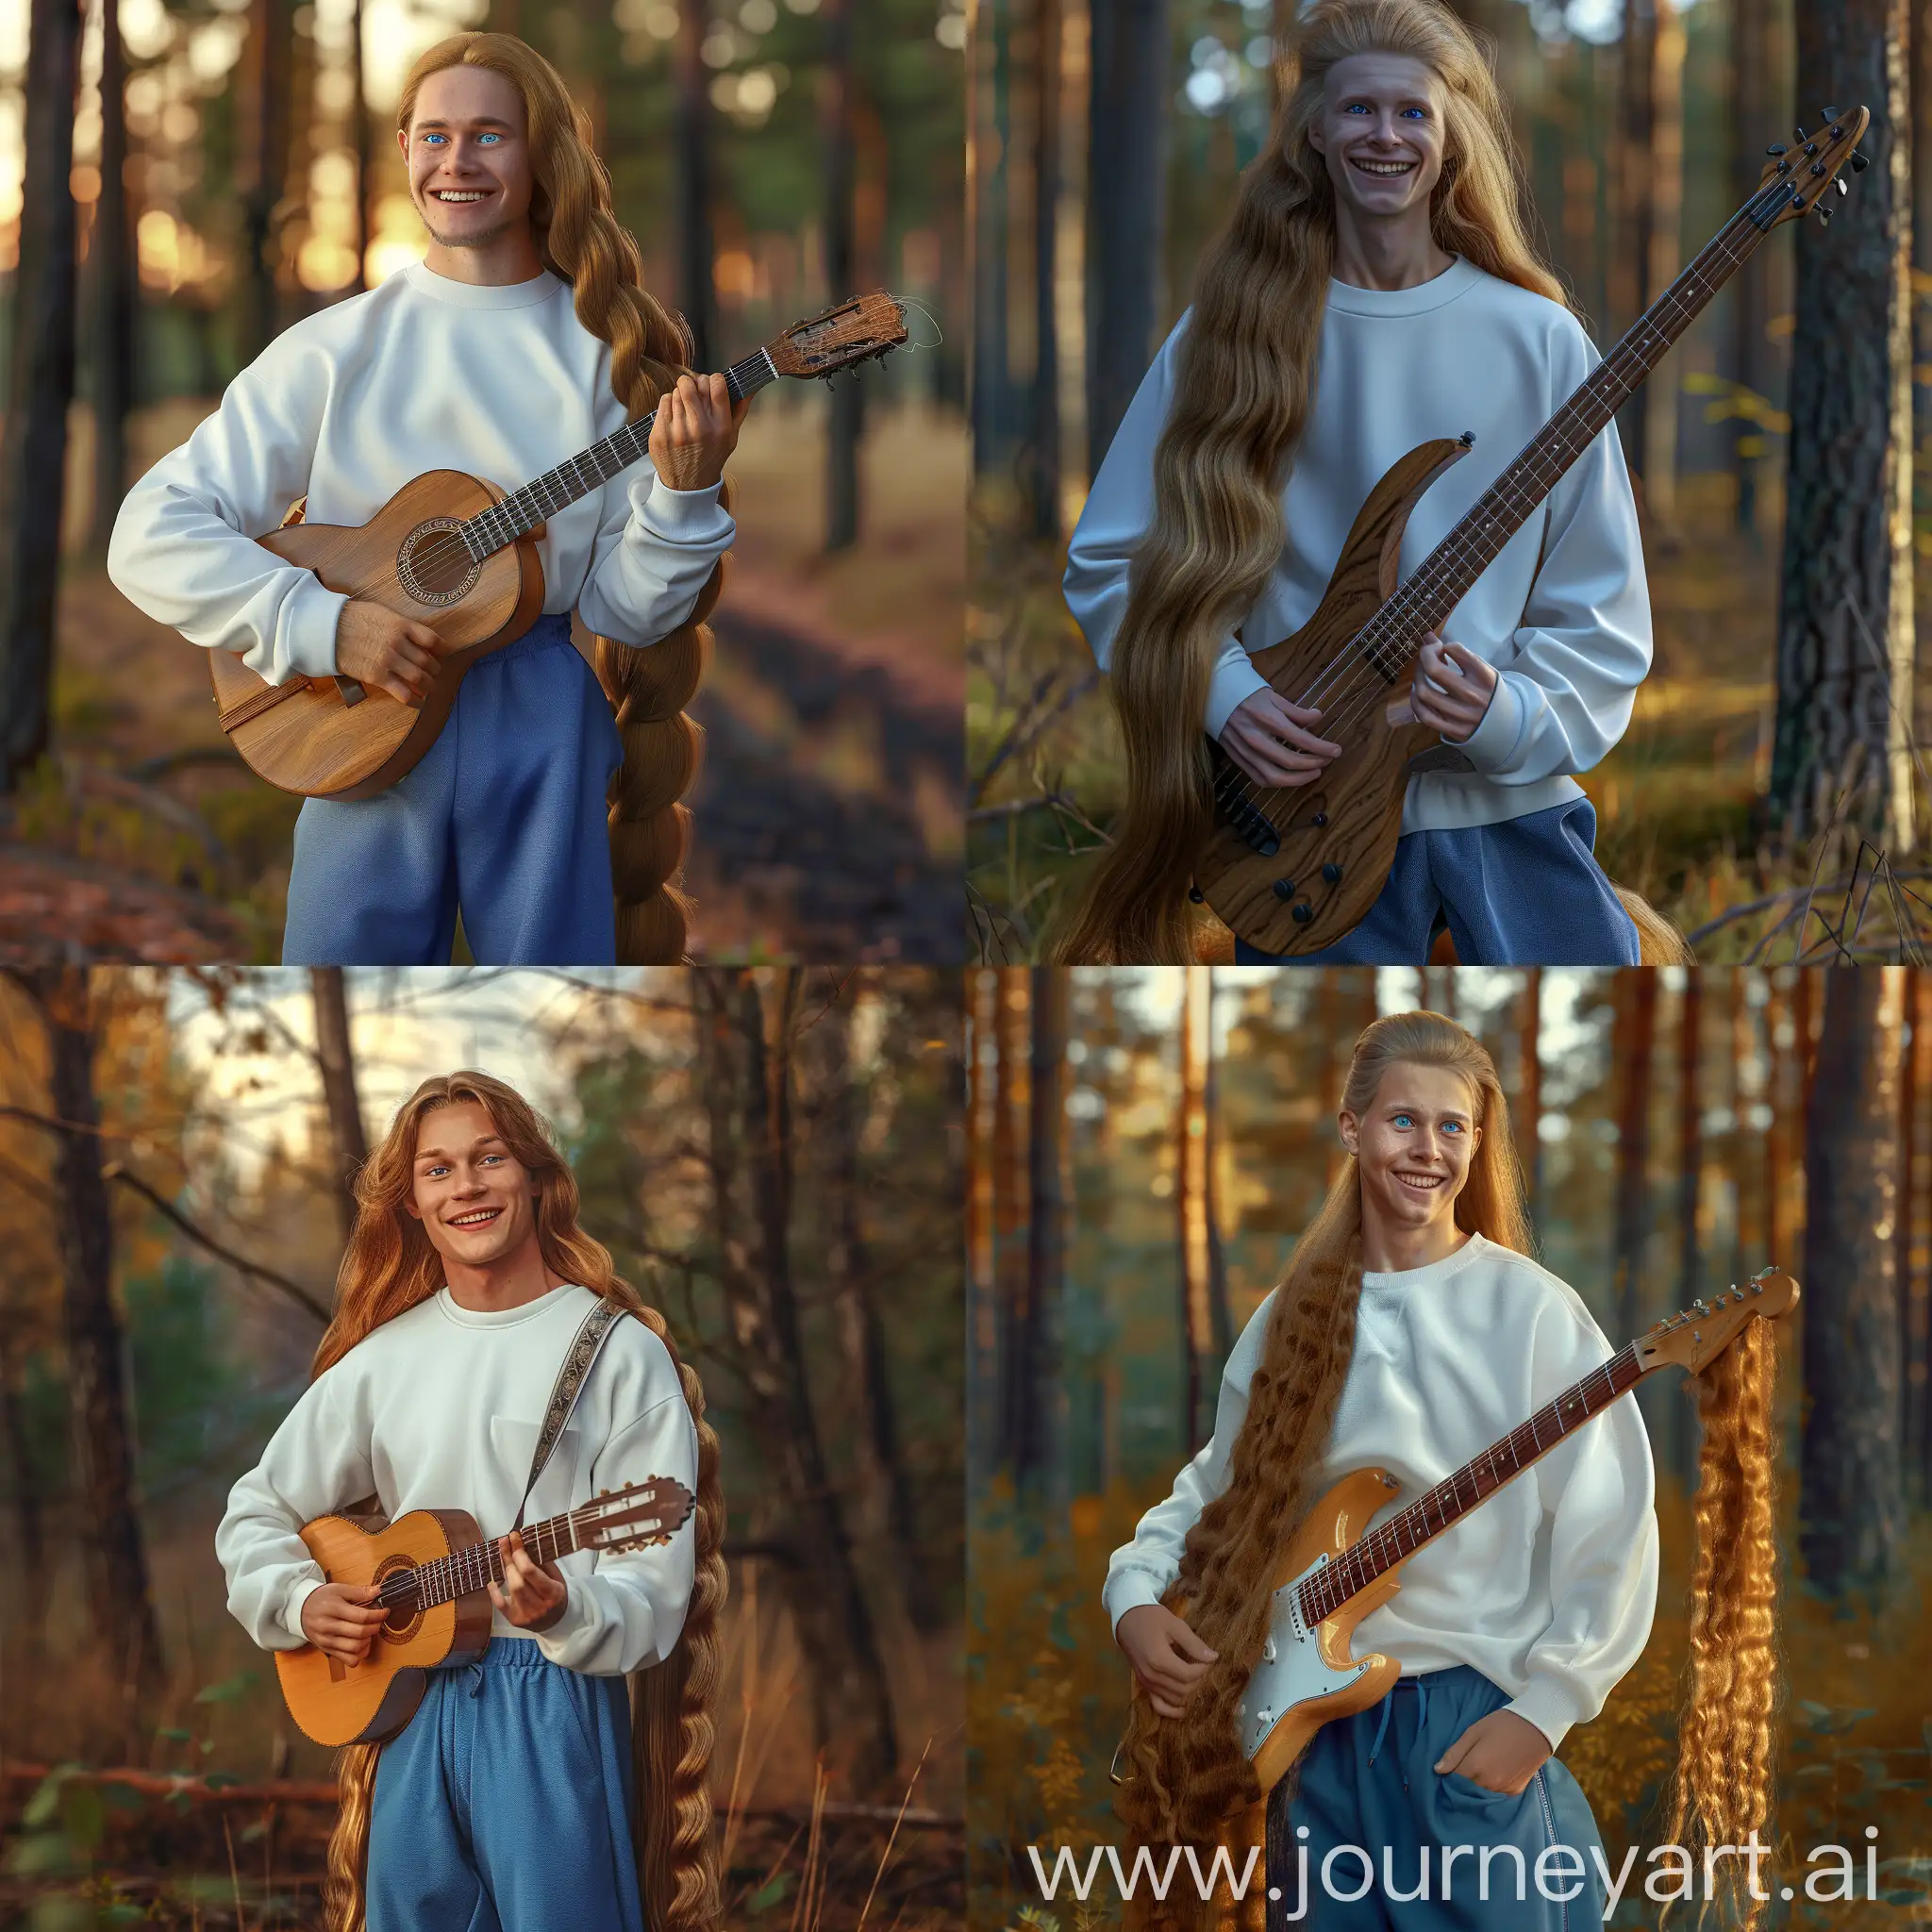 Smiling-Guitarist-with-Long-Blond-Hair-in-Forest-Setting